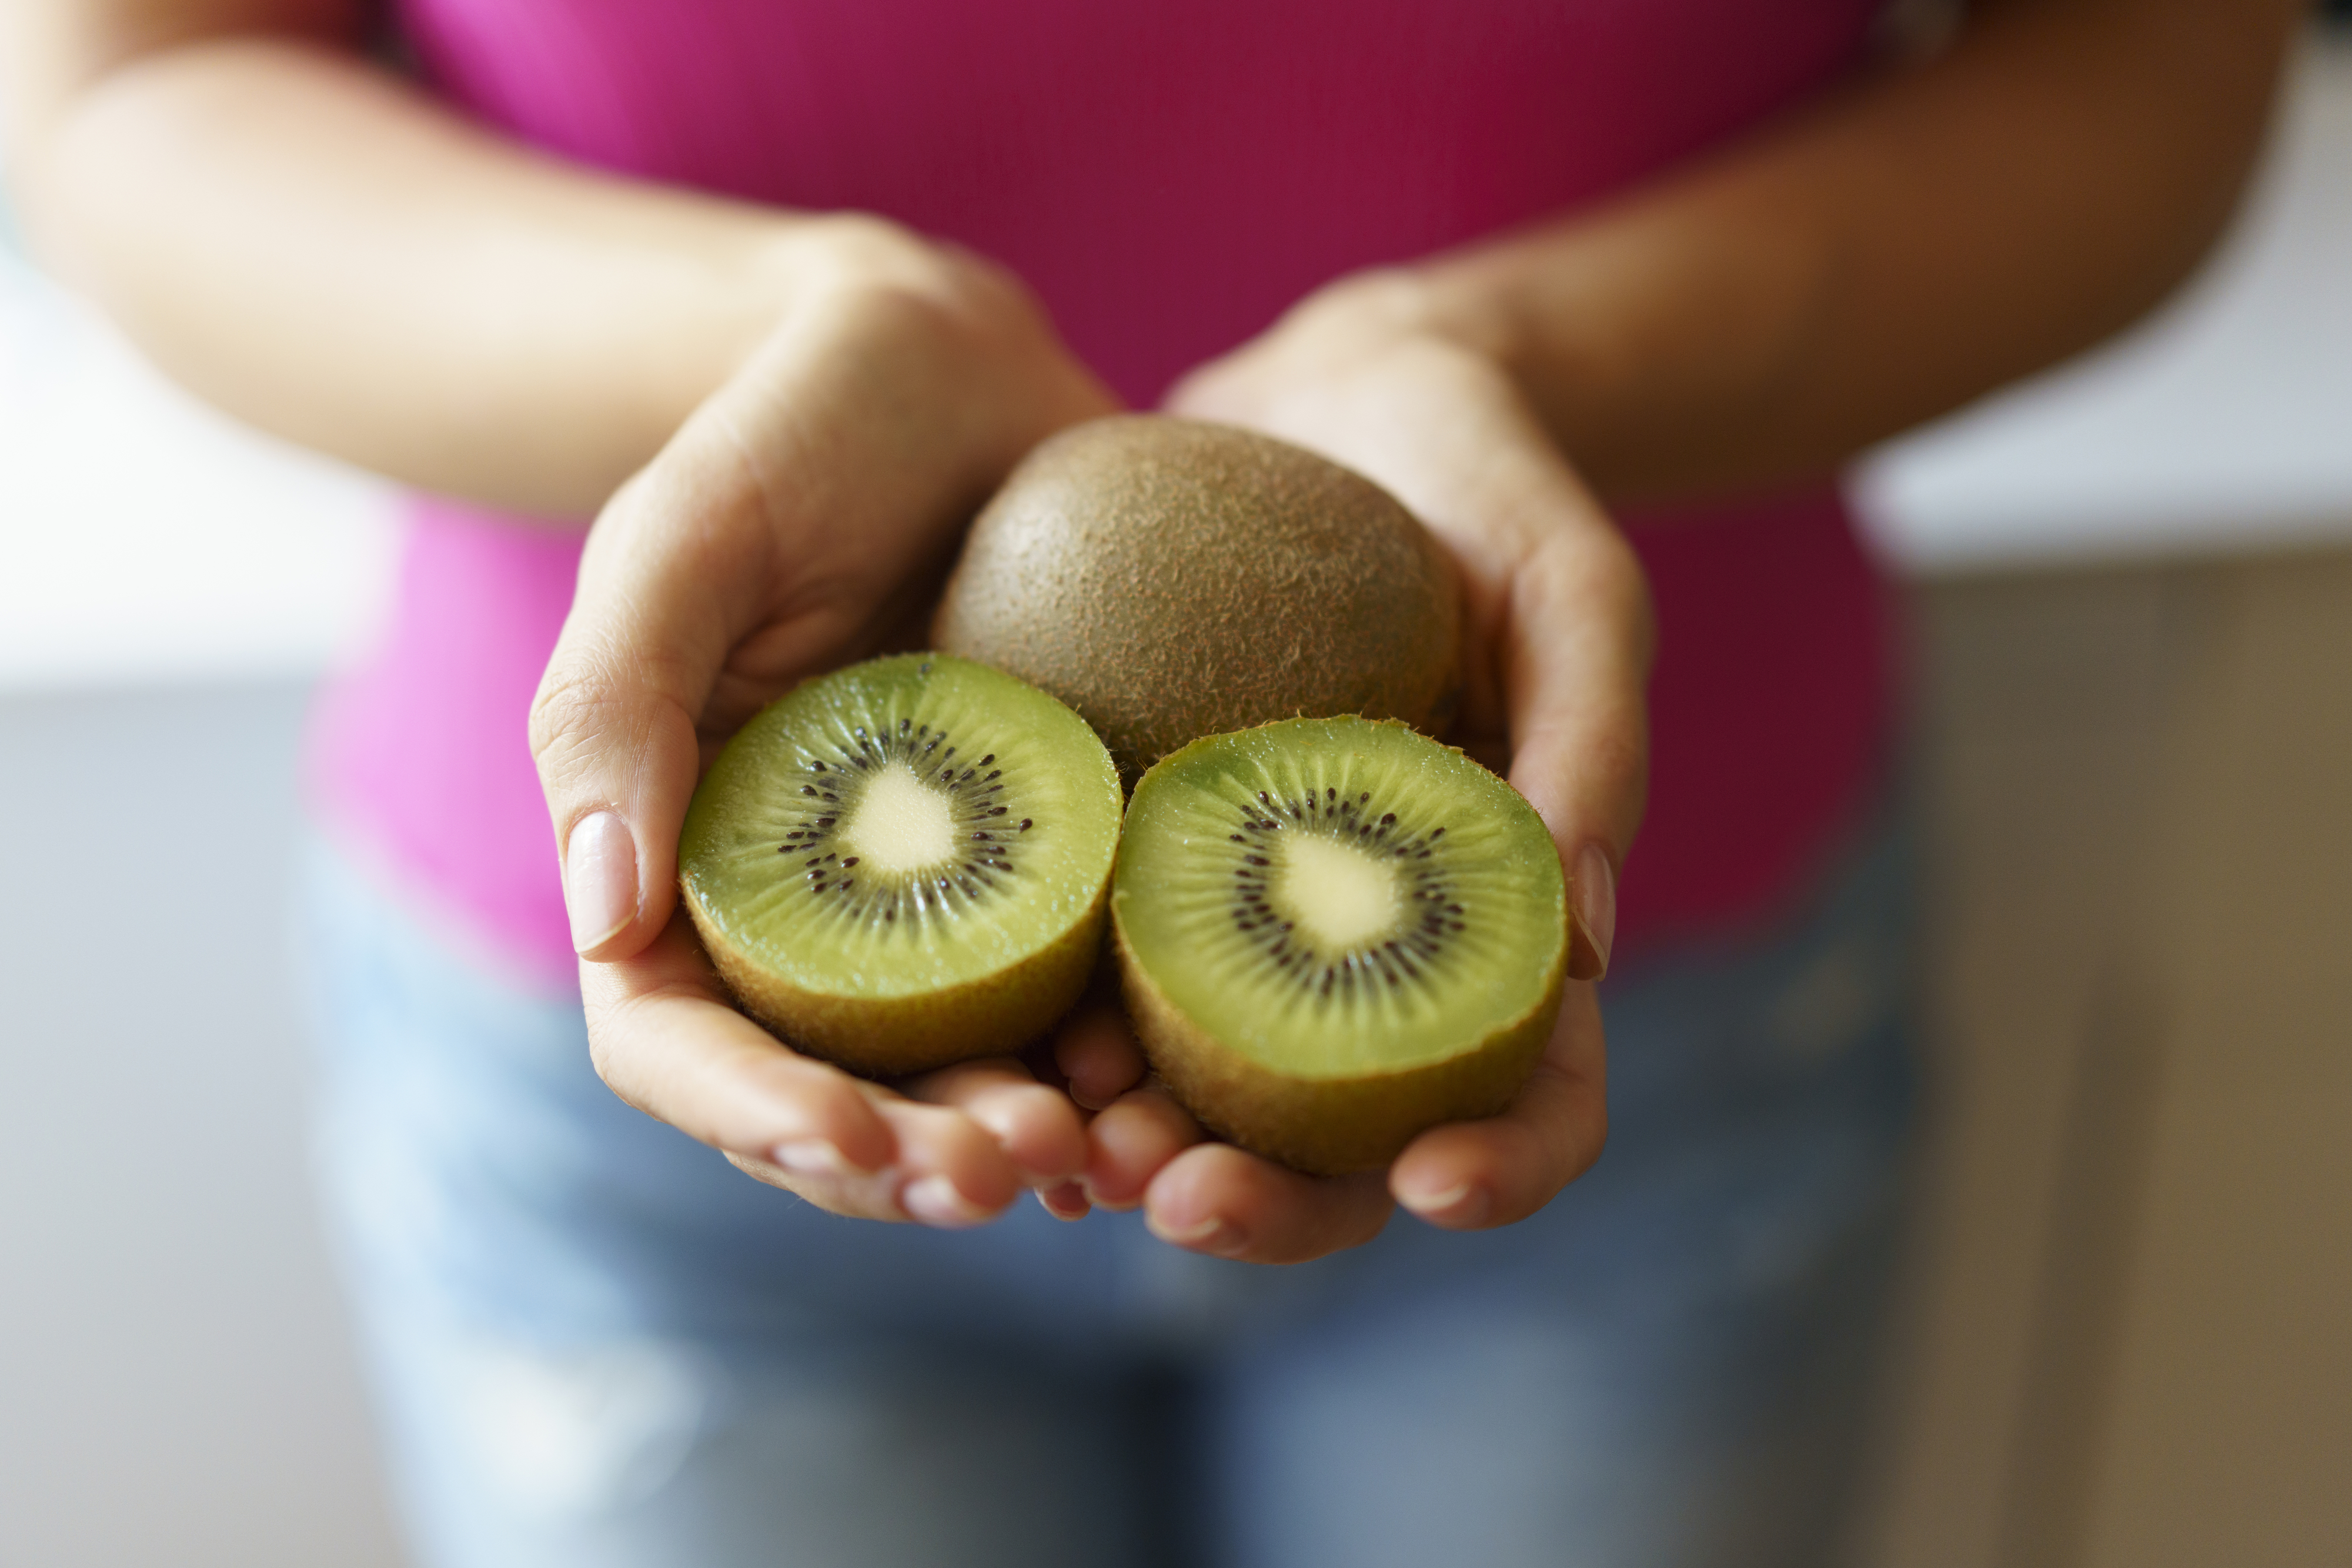 Person holding a sliced kiwi and a whole kiwi, promoting healthy eating habits